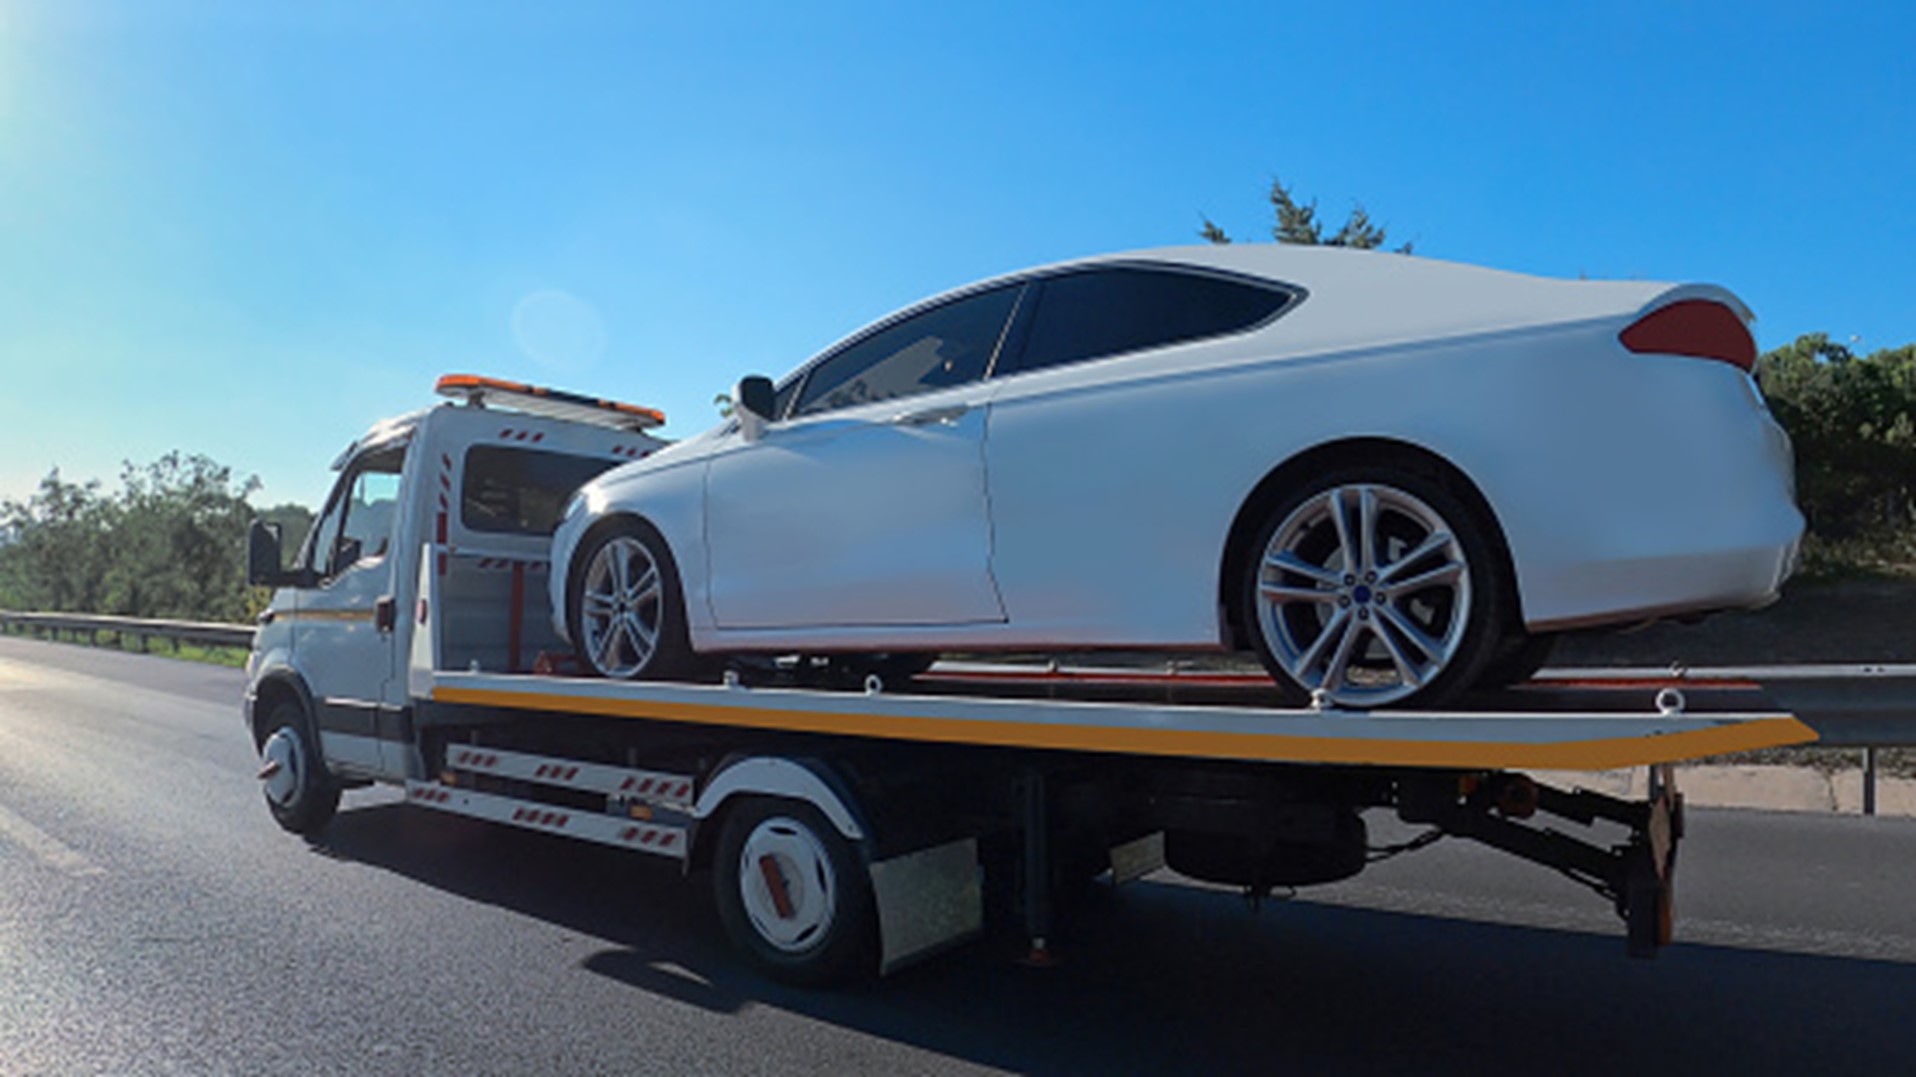 Towing and Roadside Assistance Service in Orland, CA